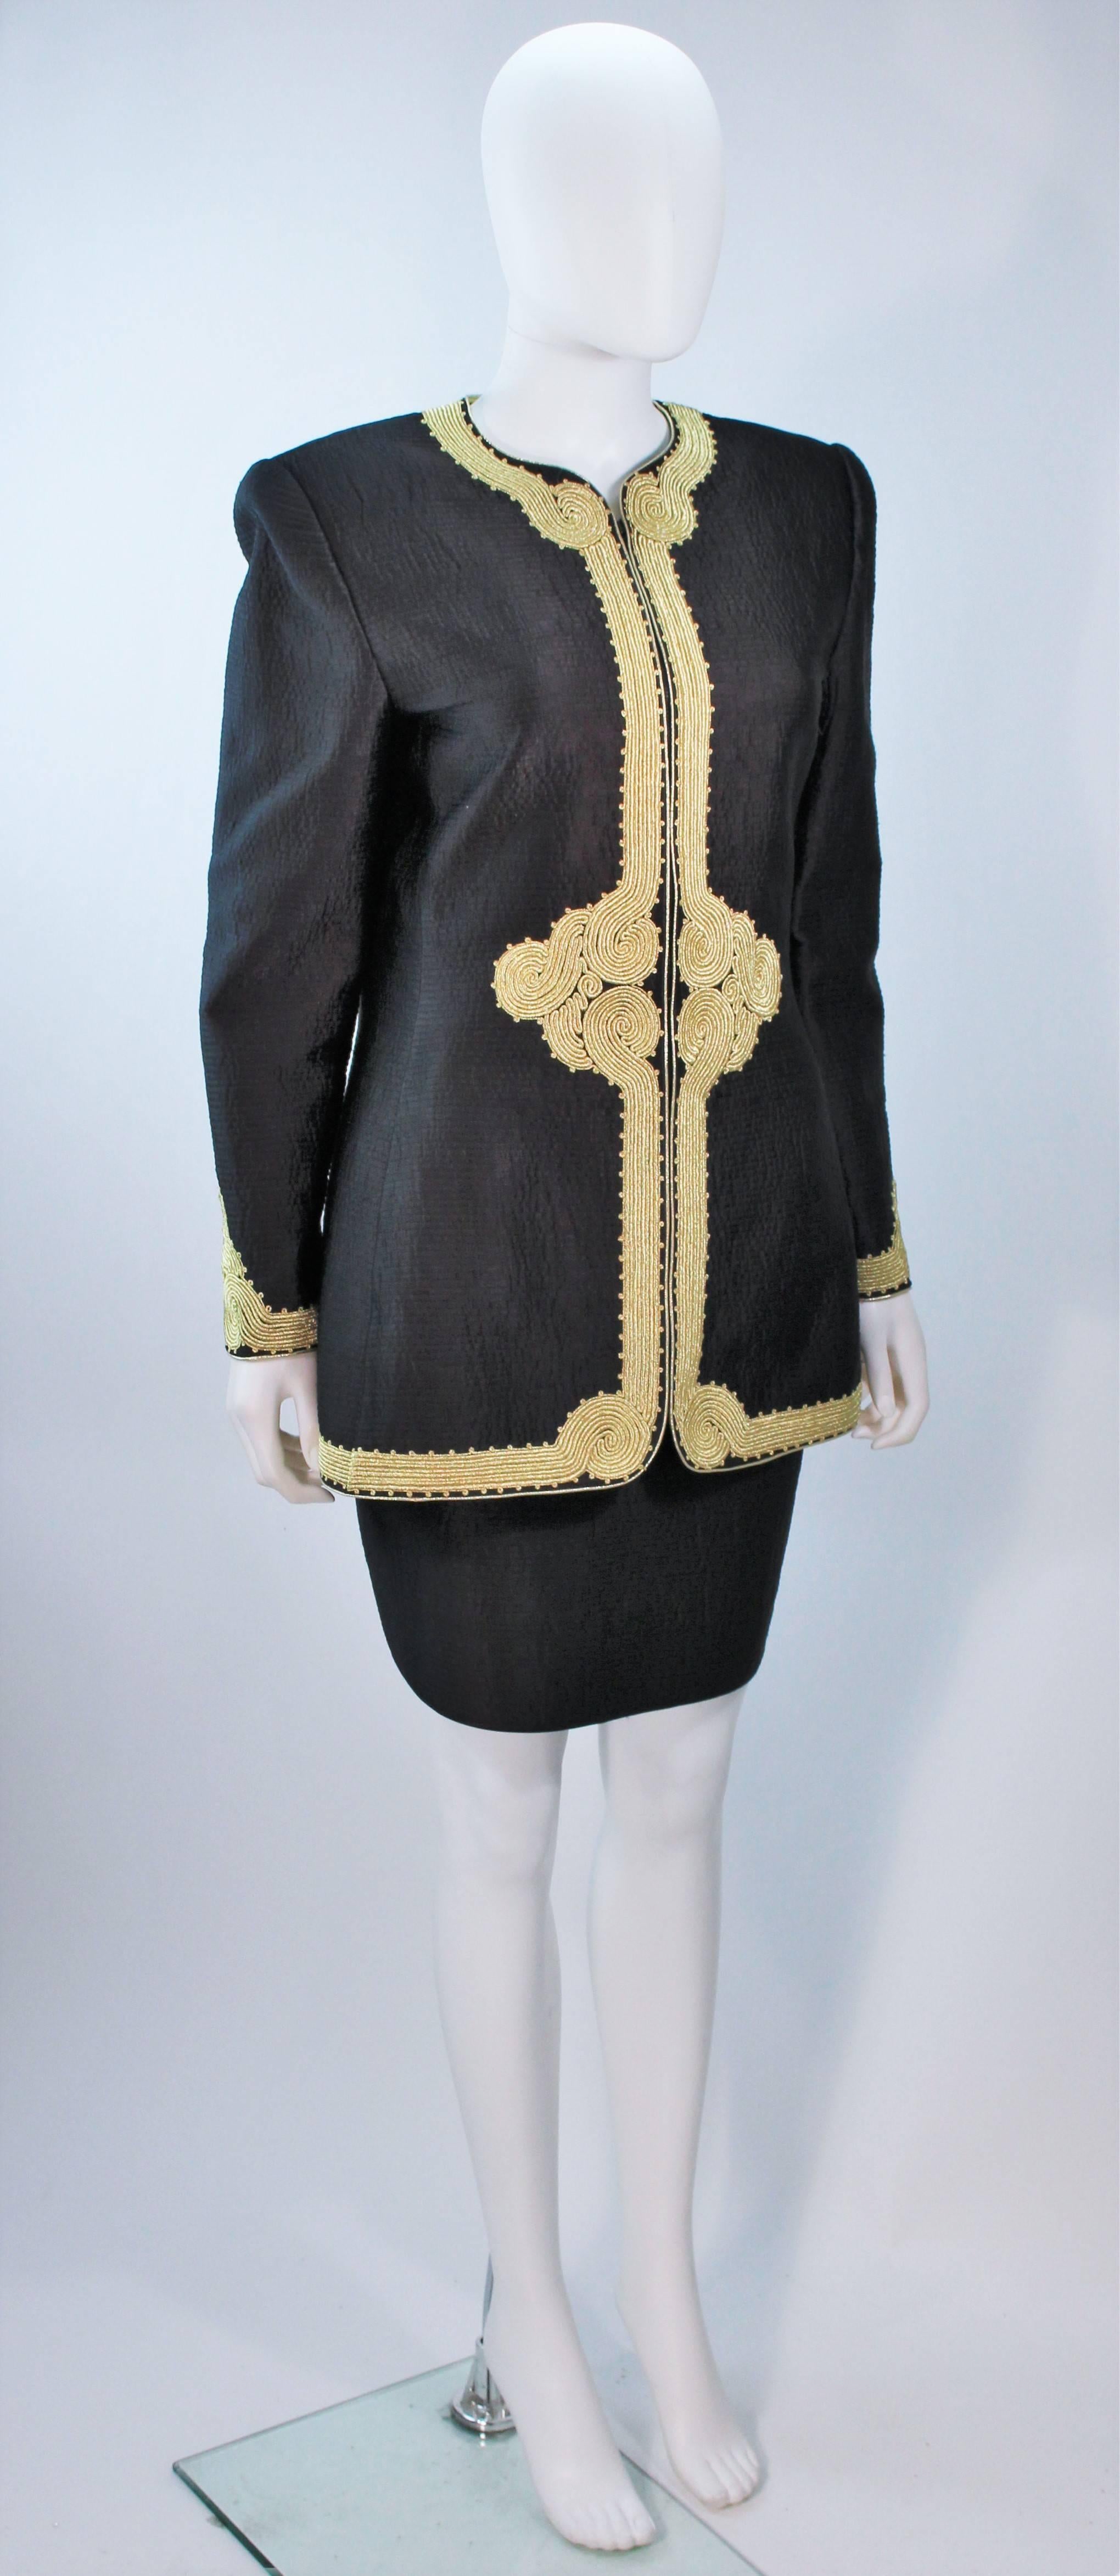 Women's MARY MCFADDEN Black Silk Skirt Suit with Gold Embroidery Size 8